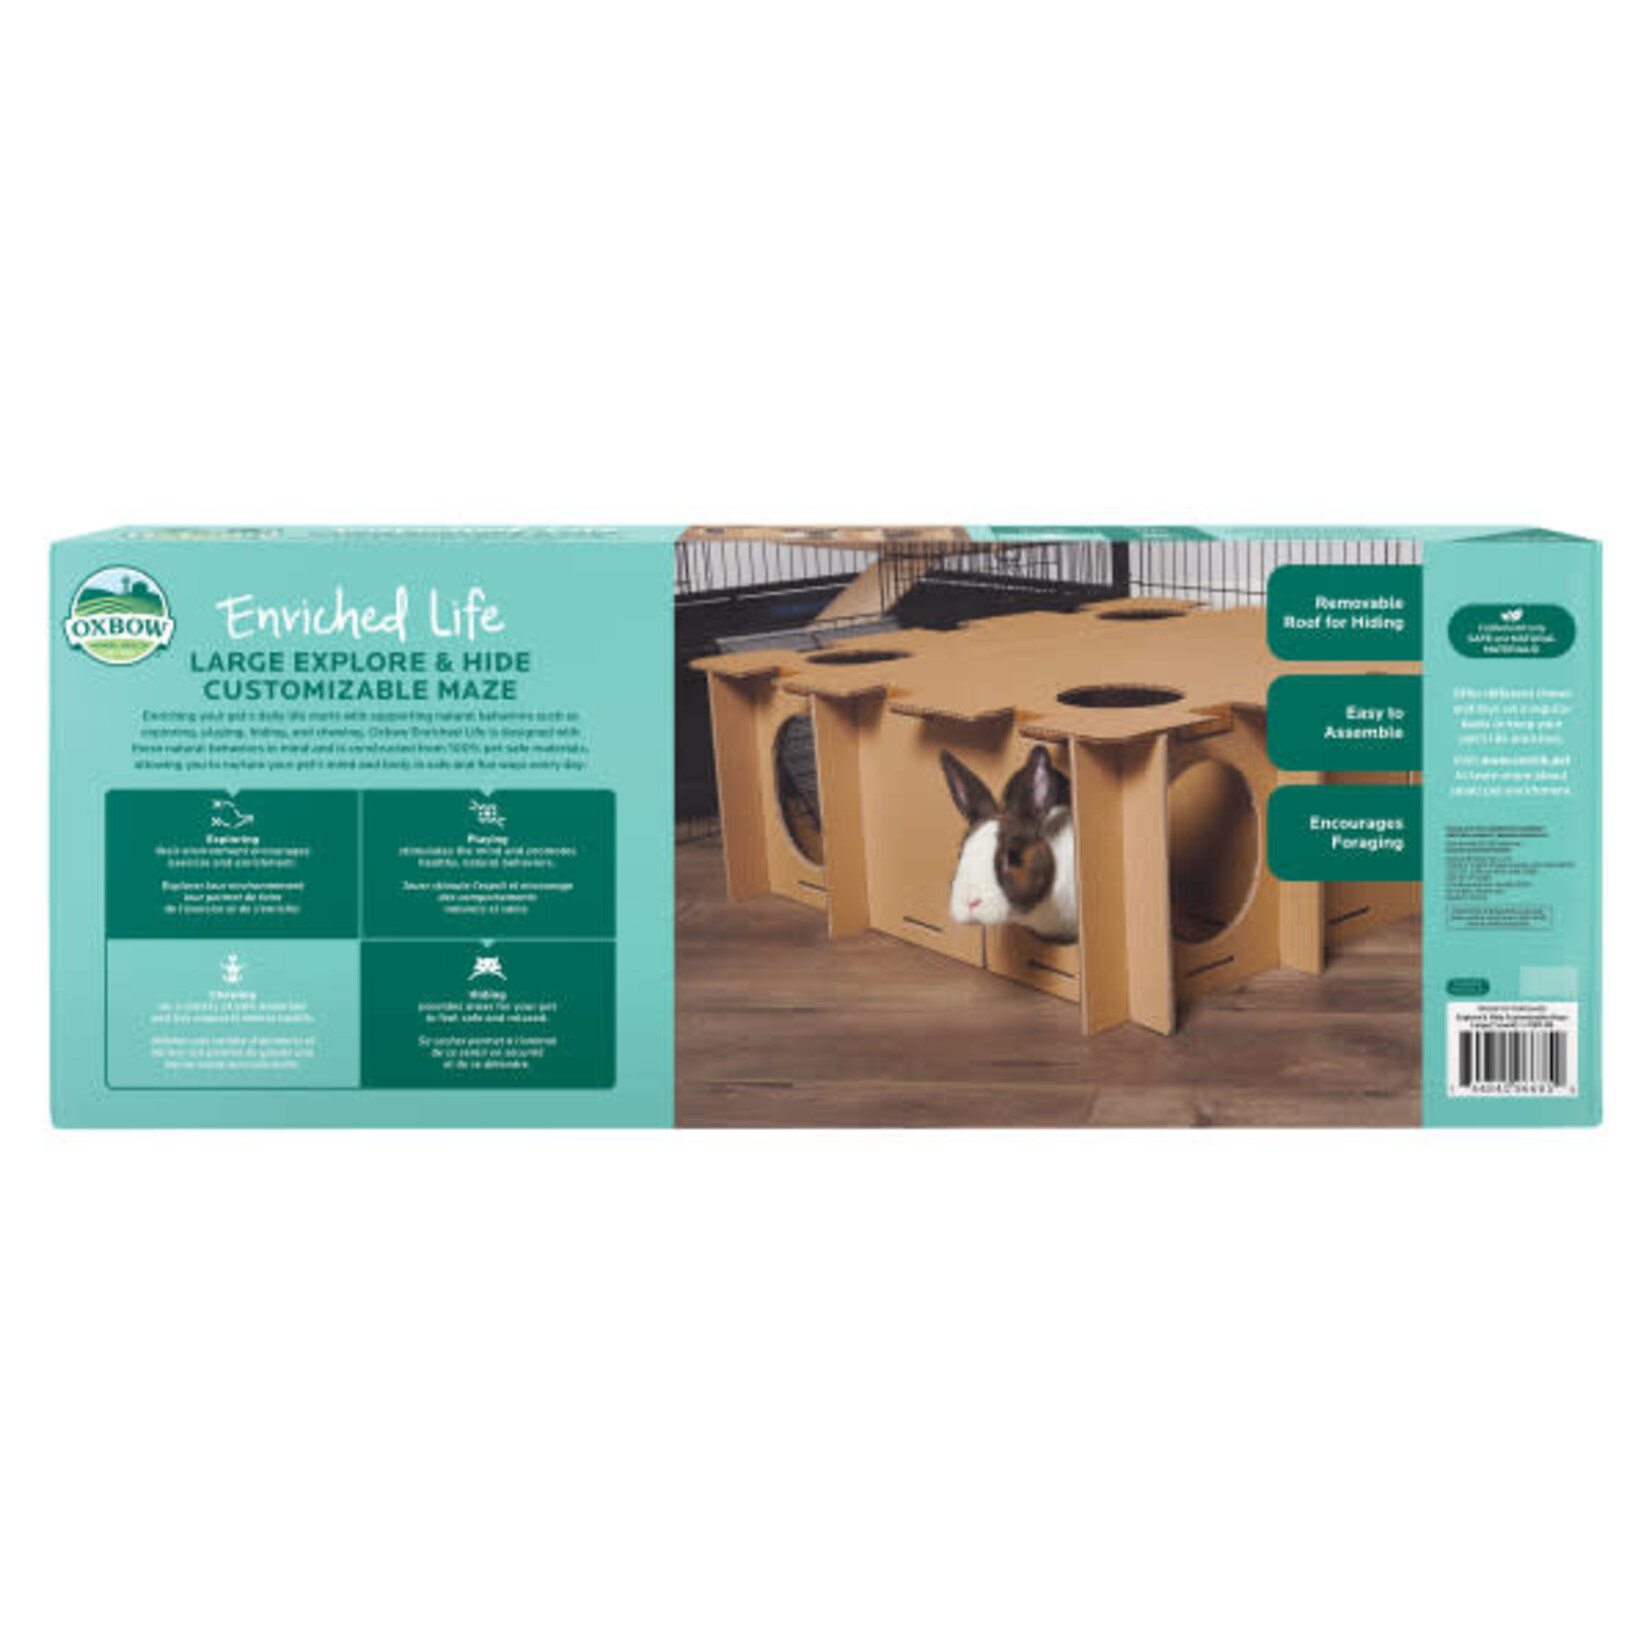 OXBOW ANIMAL HEALTH OXBOW Enriched Life Large Explore & Hide Customizable Maze